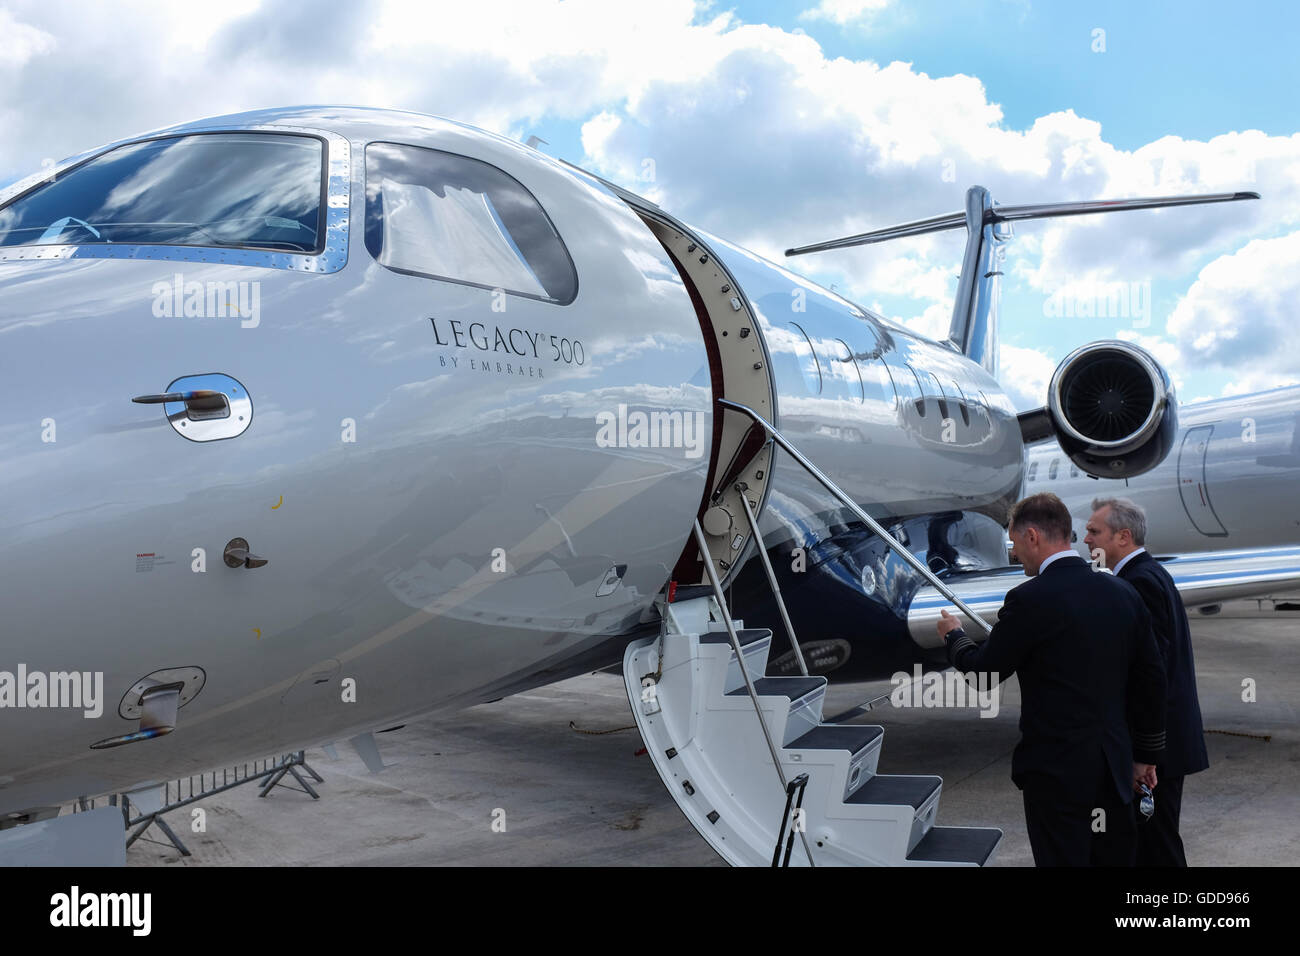 The Legacy 500 business jet by Embraer. Stock Photo